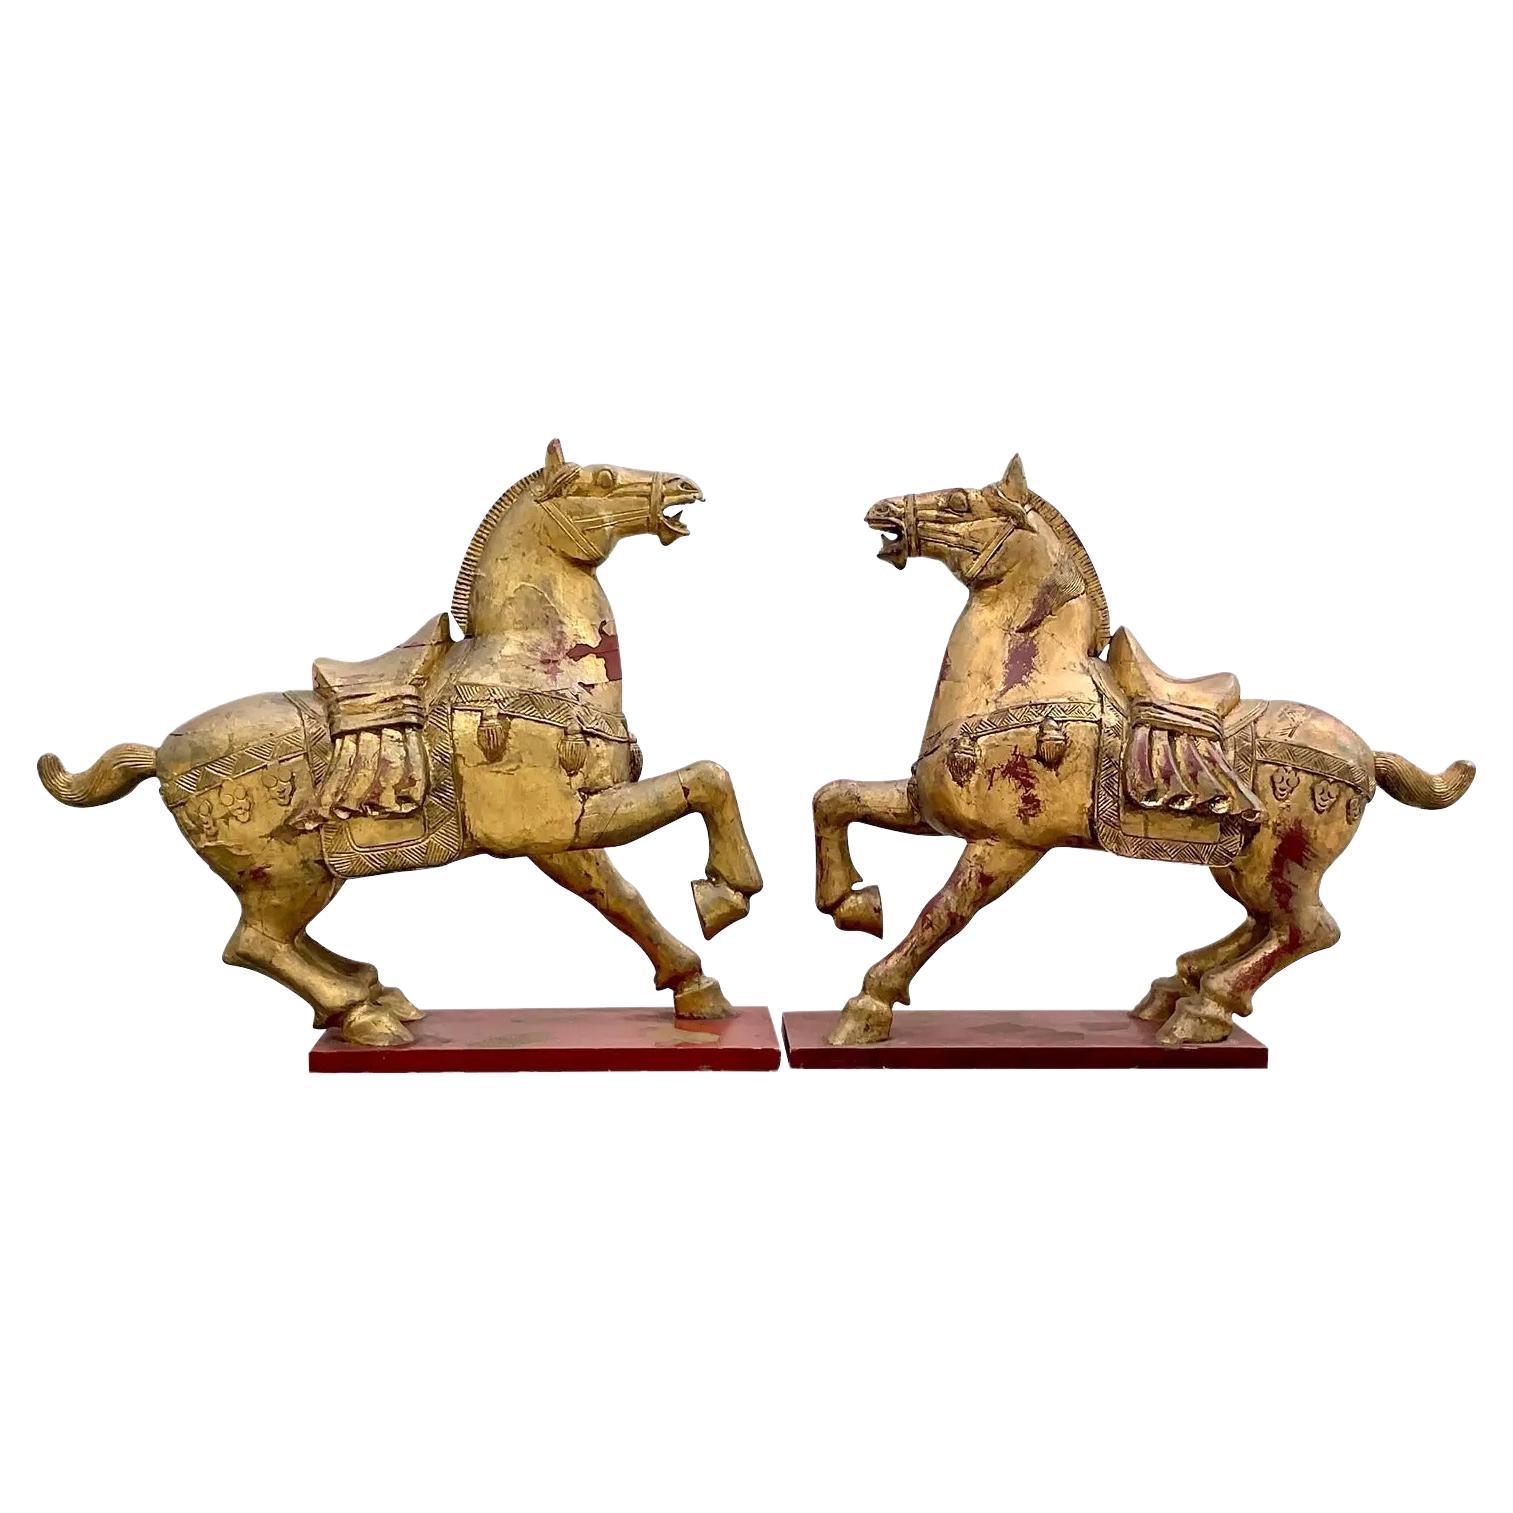 Vintage Asian Gilt Carved Wooden Emperor Horses - a Pair For Sale